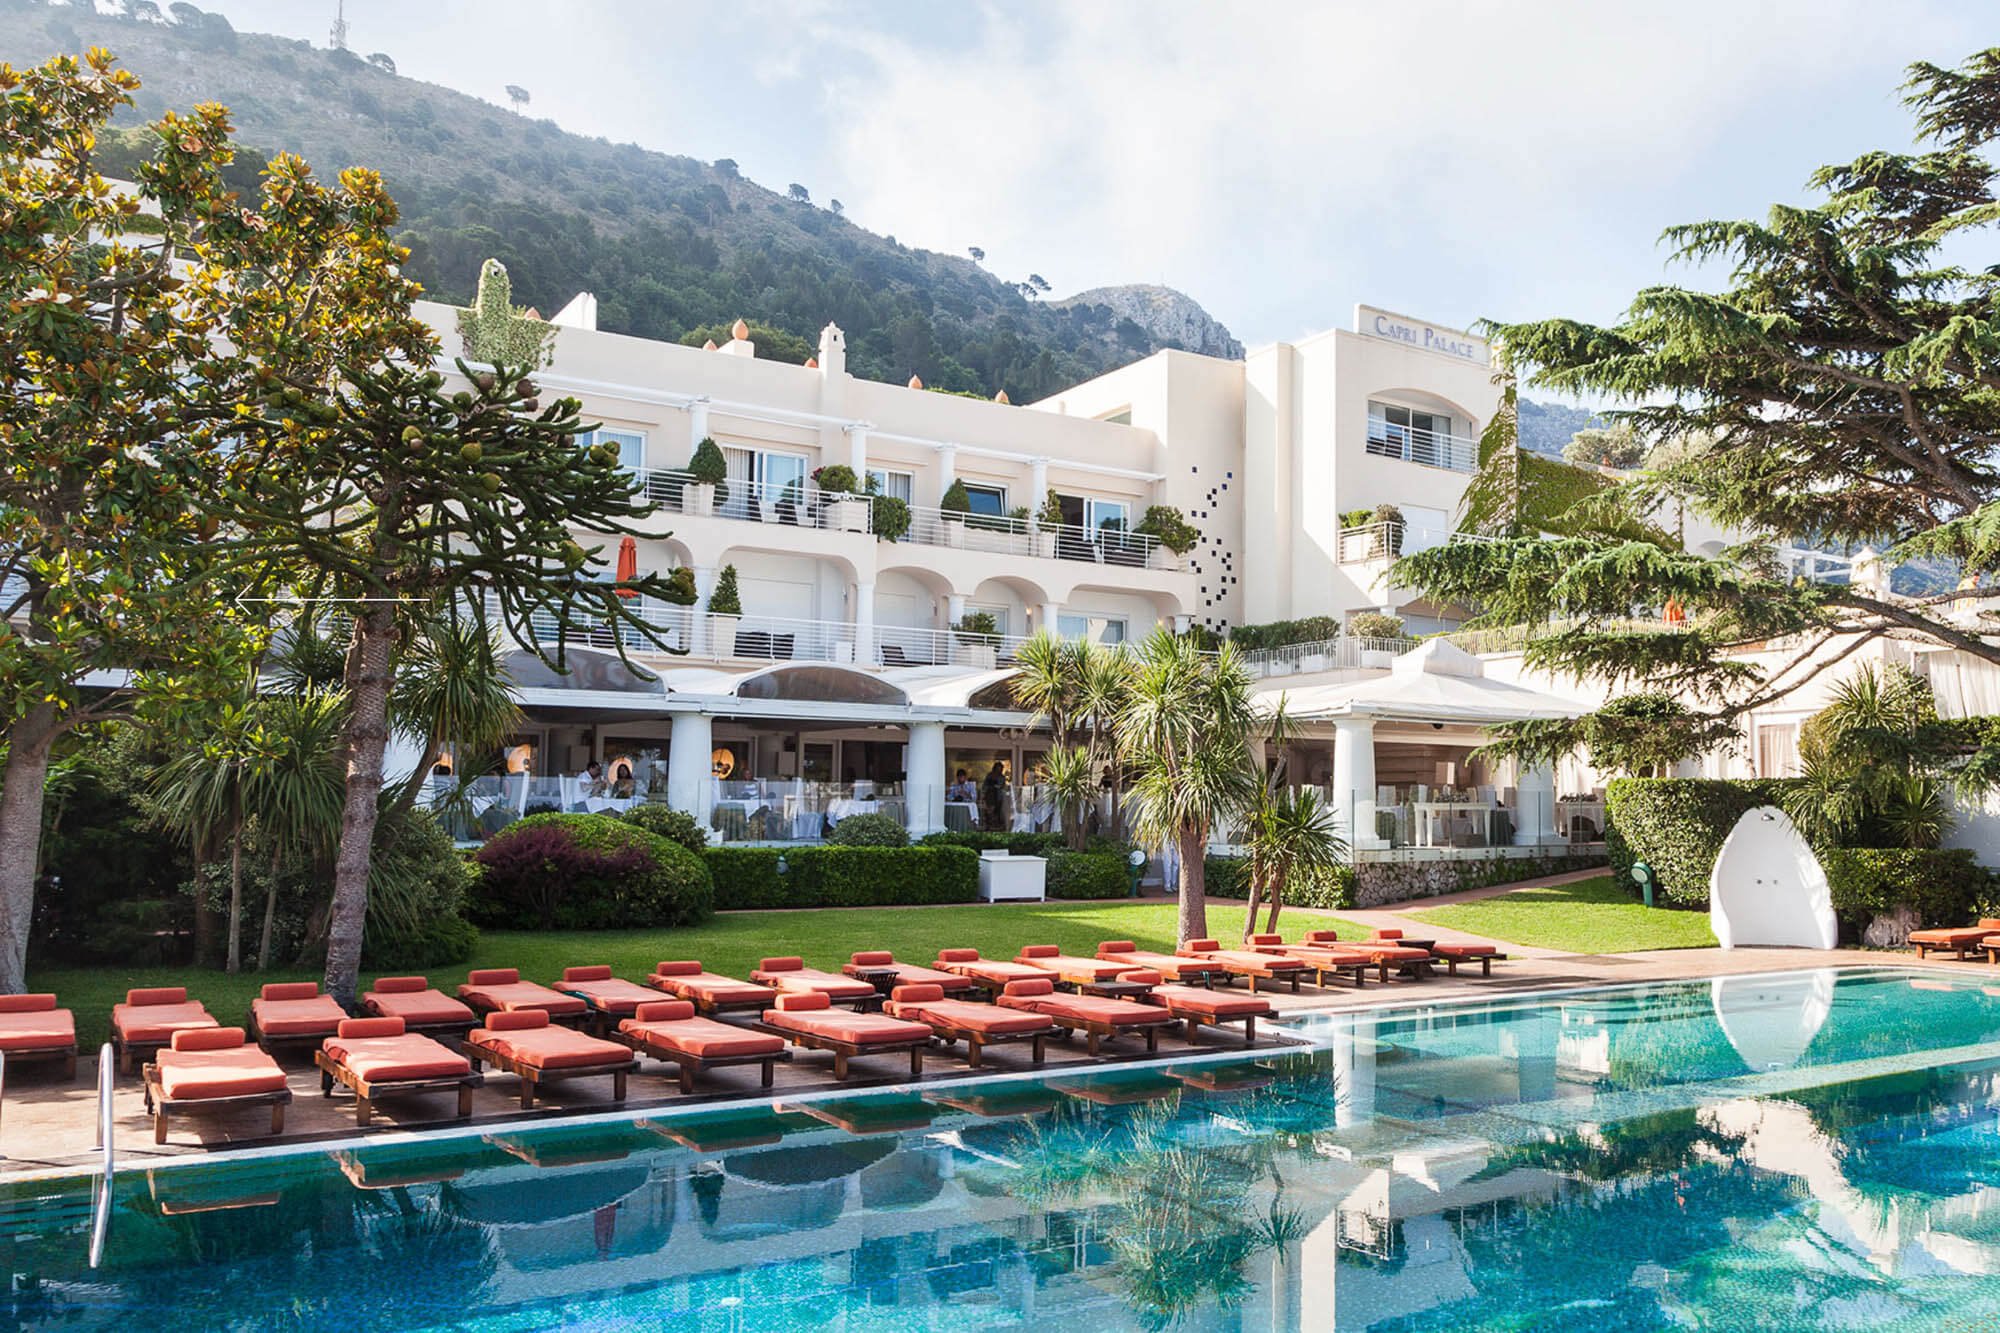 Stunning Capri Palace Jumeirah, one of the best hotels in Capri